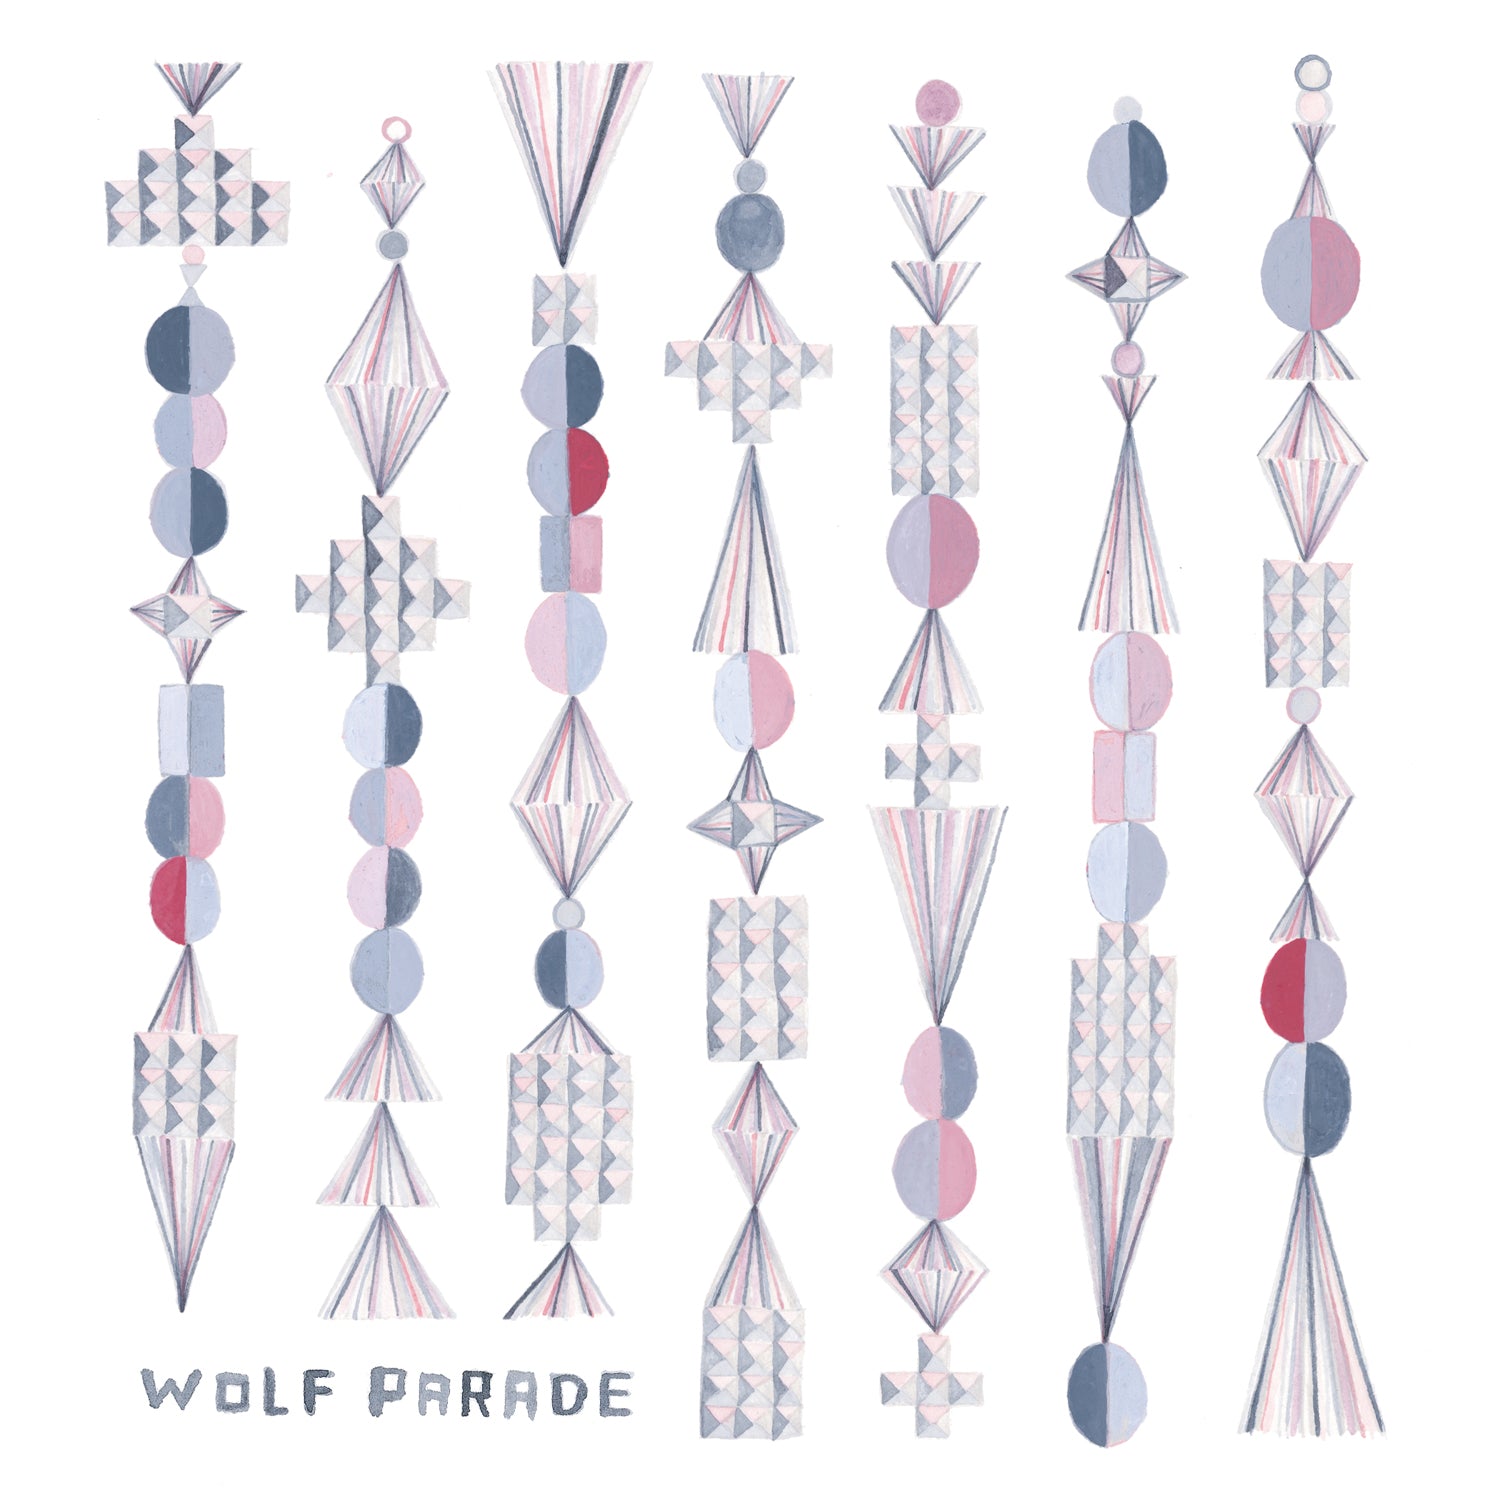 Wolf Parade To Tour 'Apologies To The Queen Mary' With Original Line Up